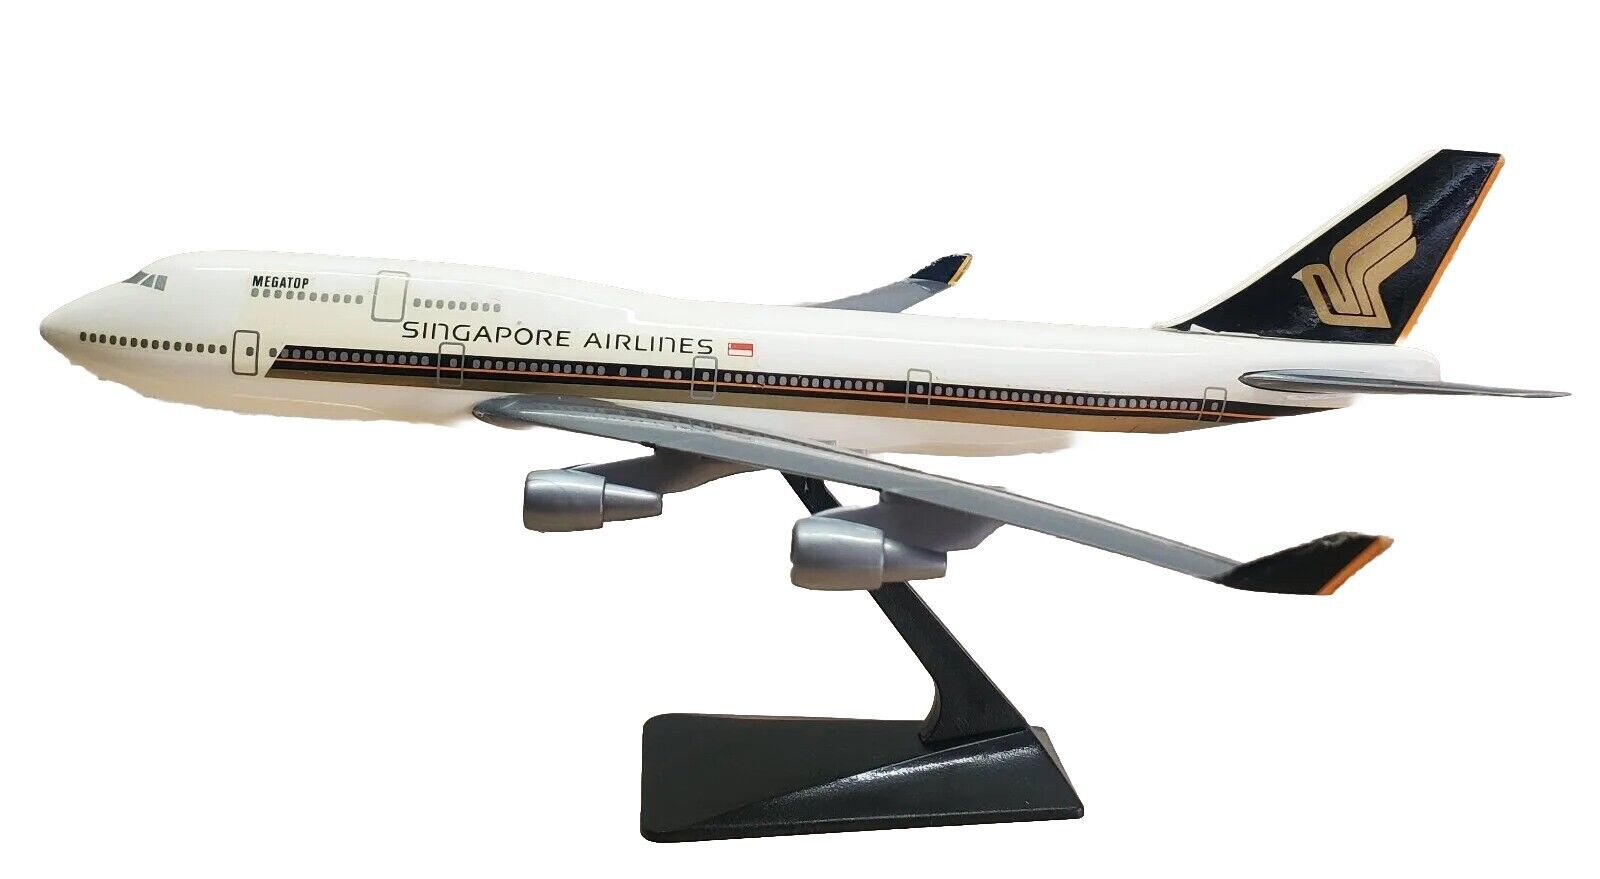 IMC Holland Singapore Megatop Airlines 747-400 1:200 W/ Push Back Tractor 